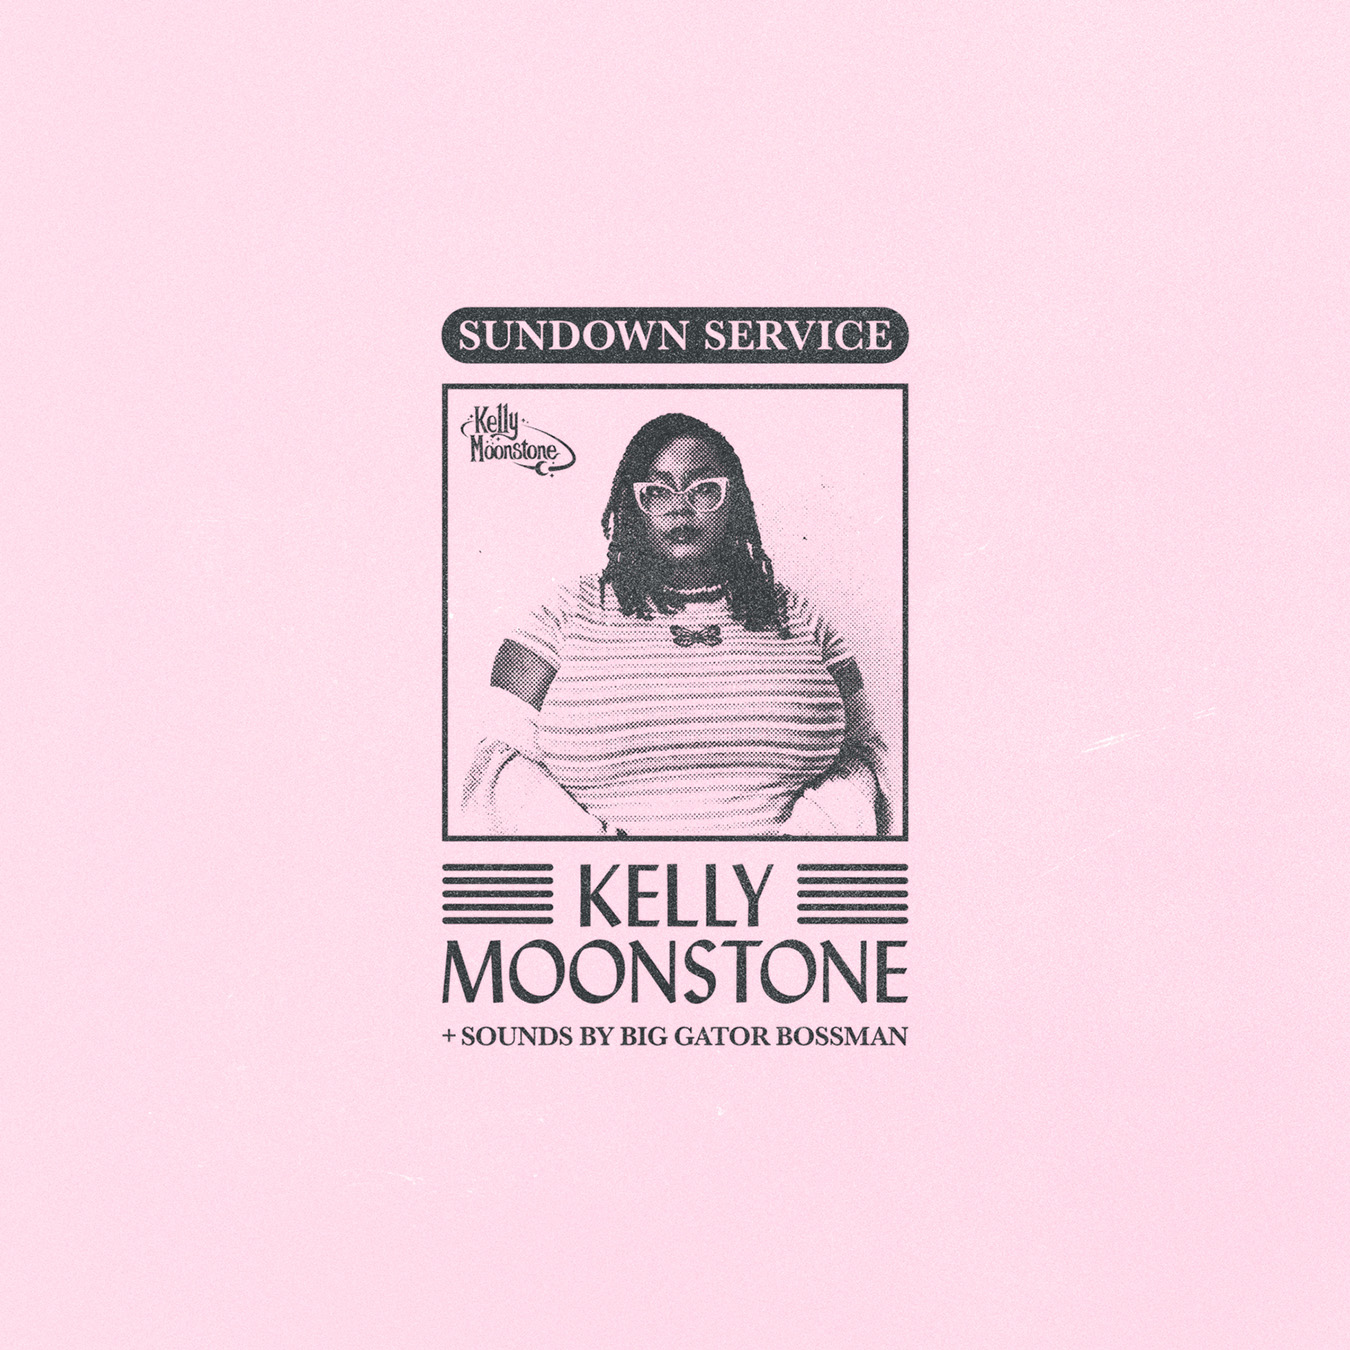 Brochure: 'KELLY MOONSTONE' featuring a girl's image and accompanying descriptive text.